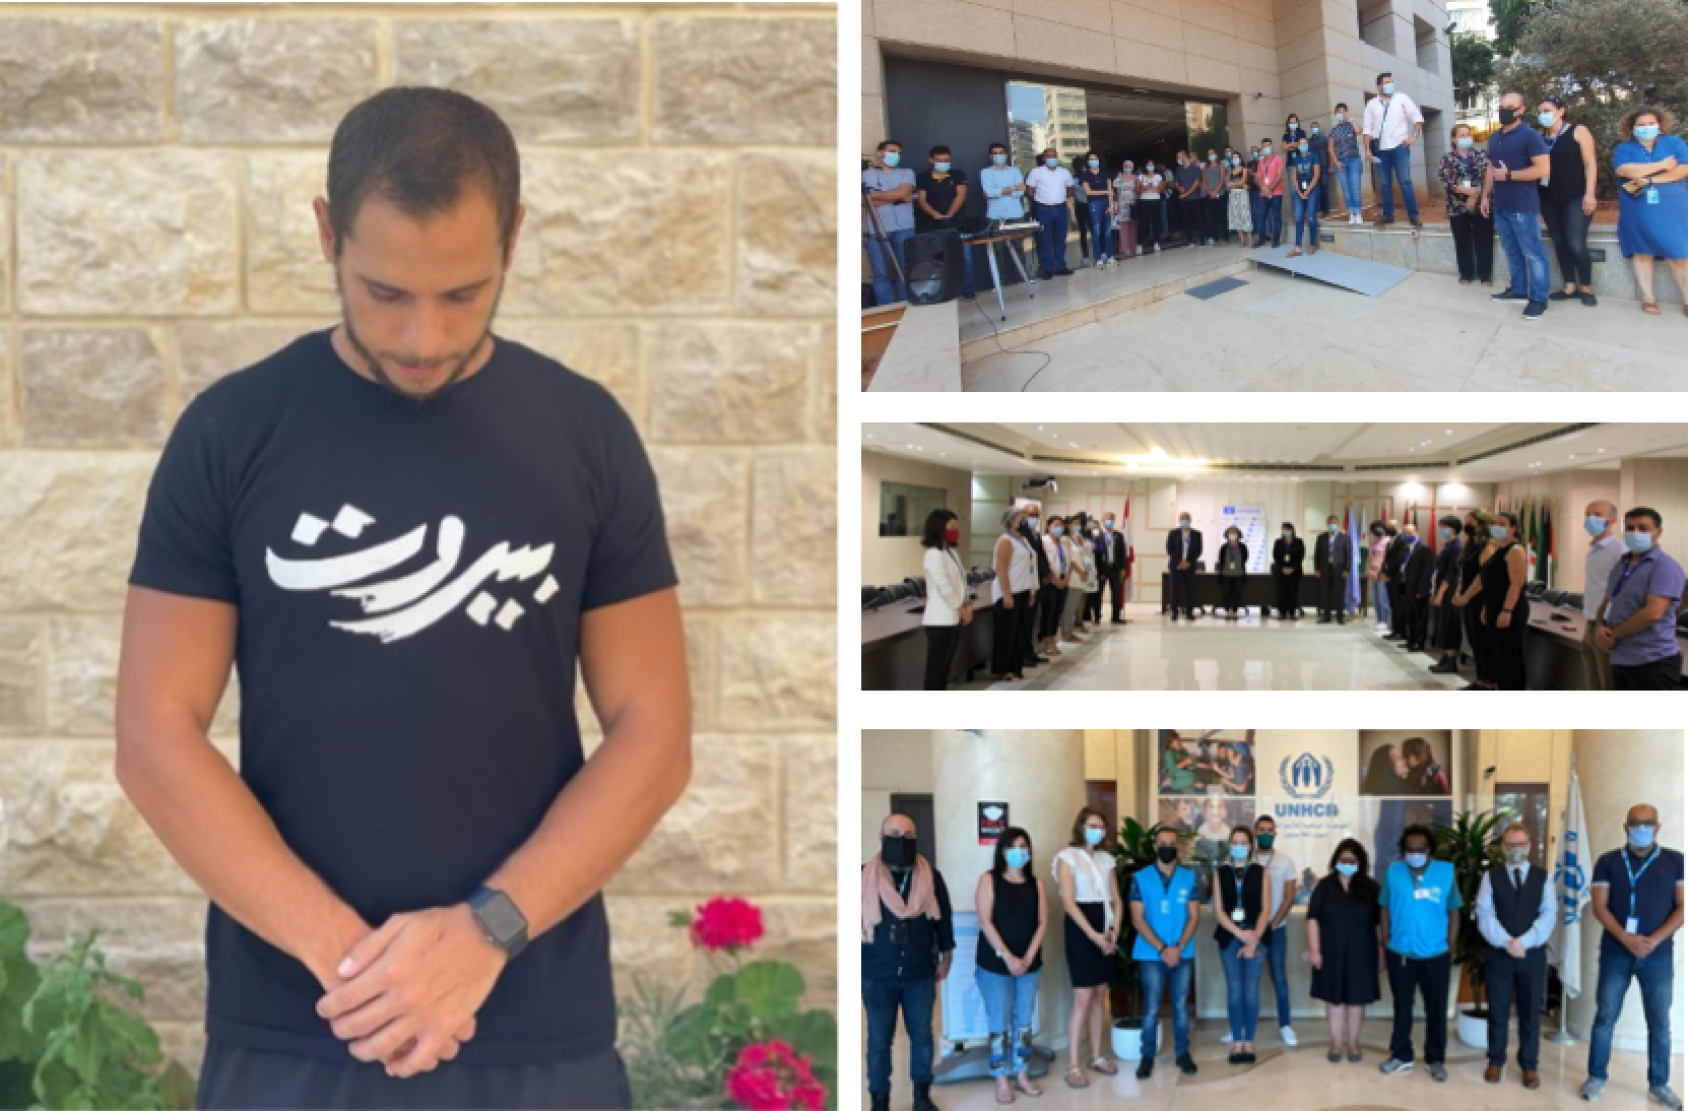 UN staff in Lebanon observing a moment of silence.